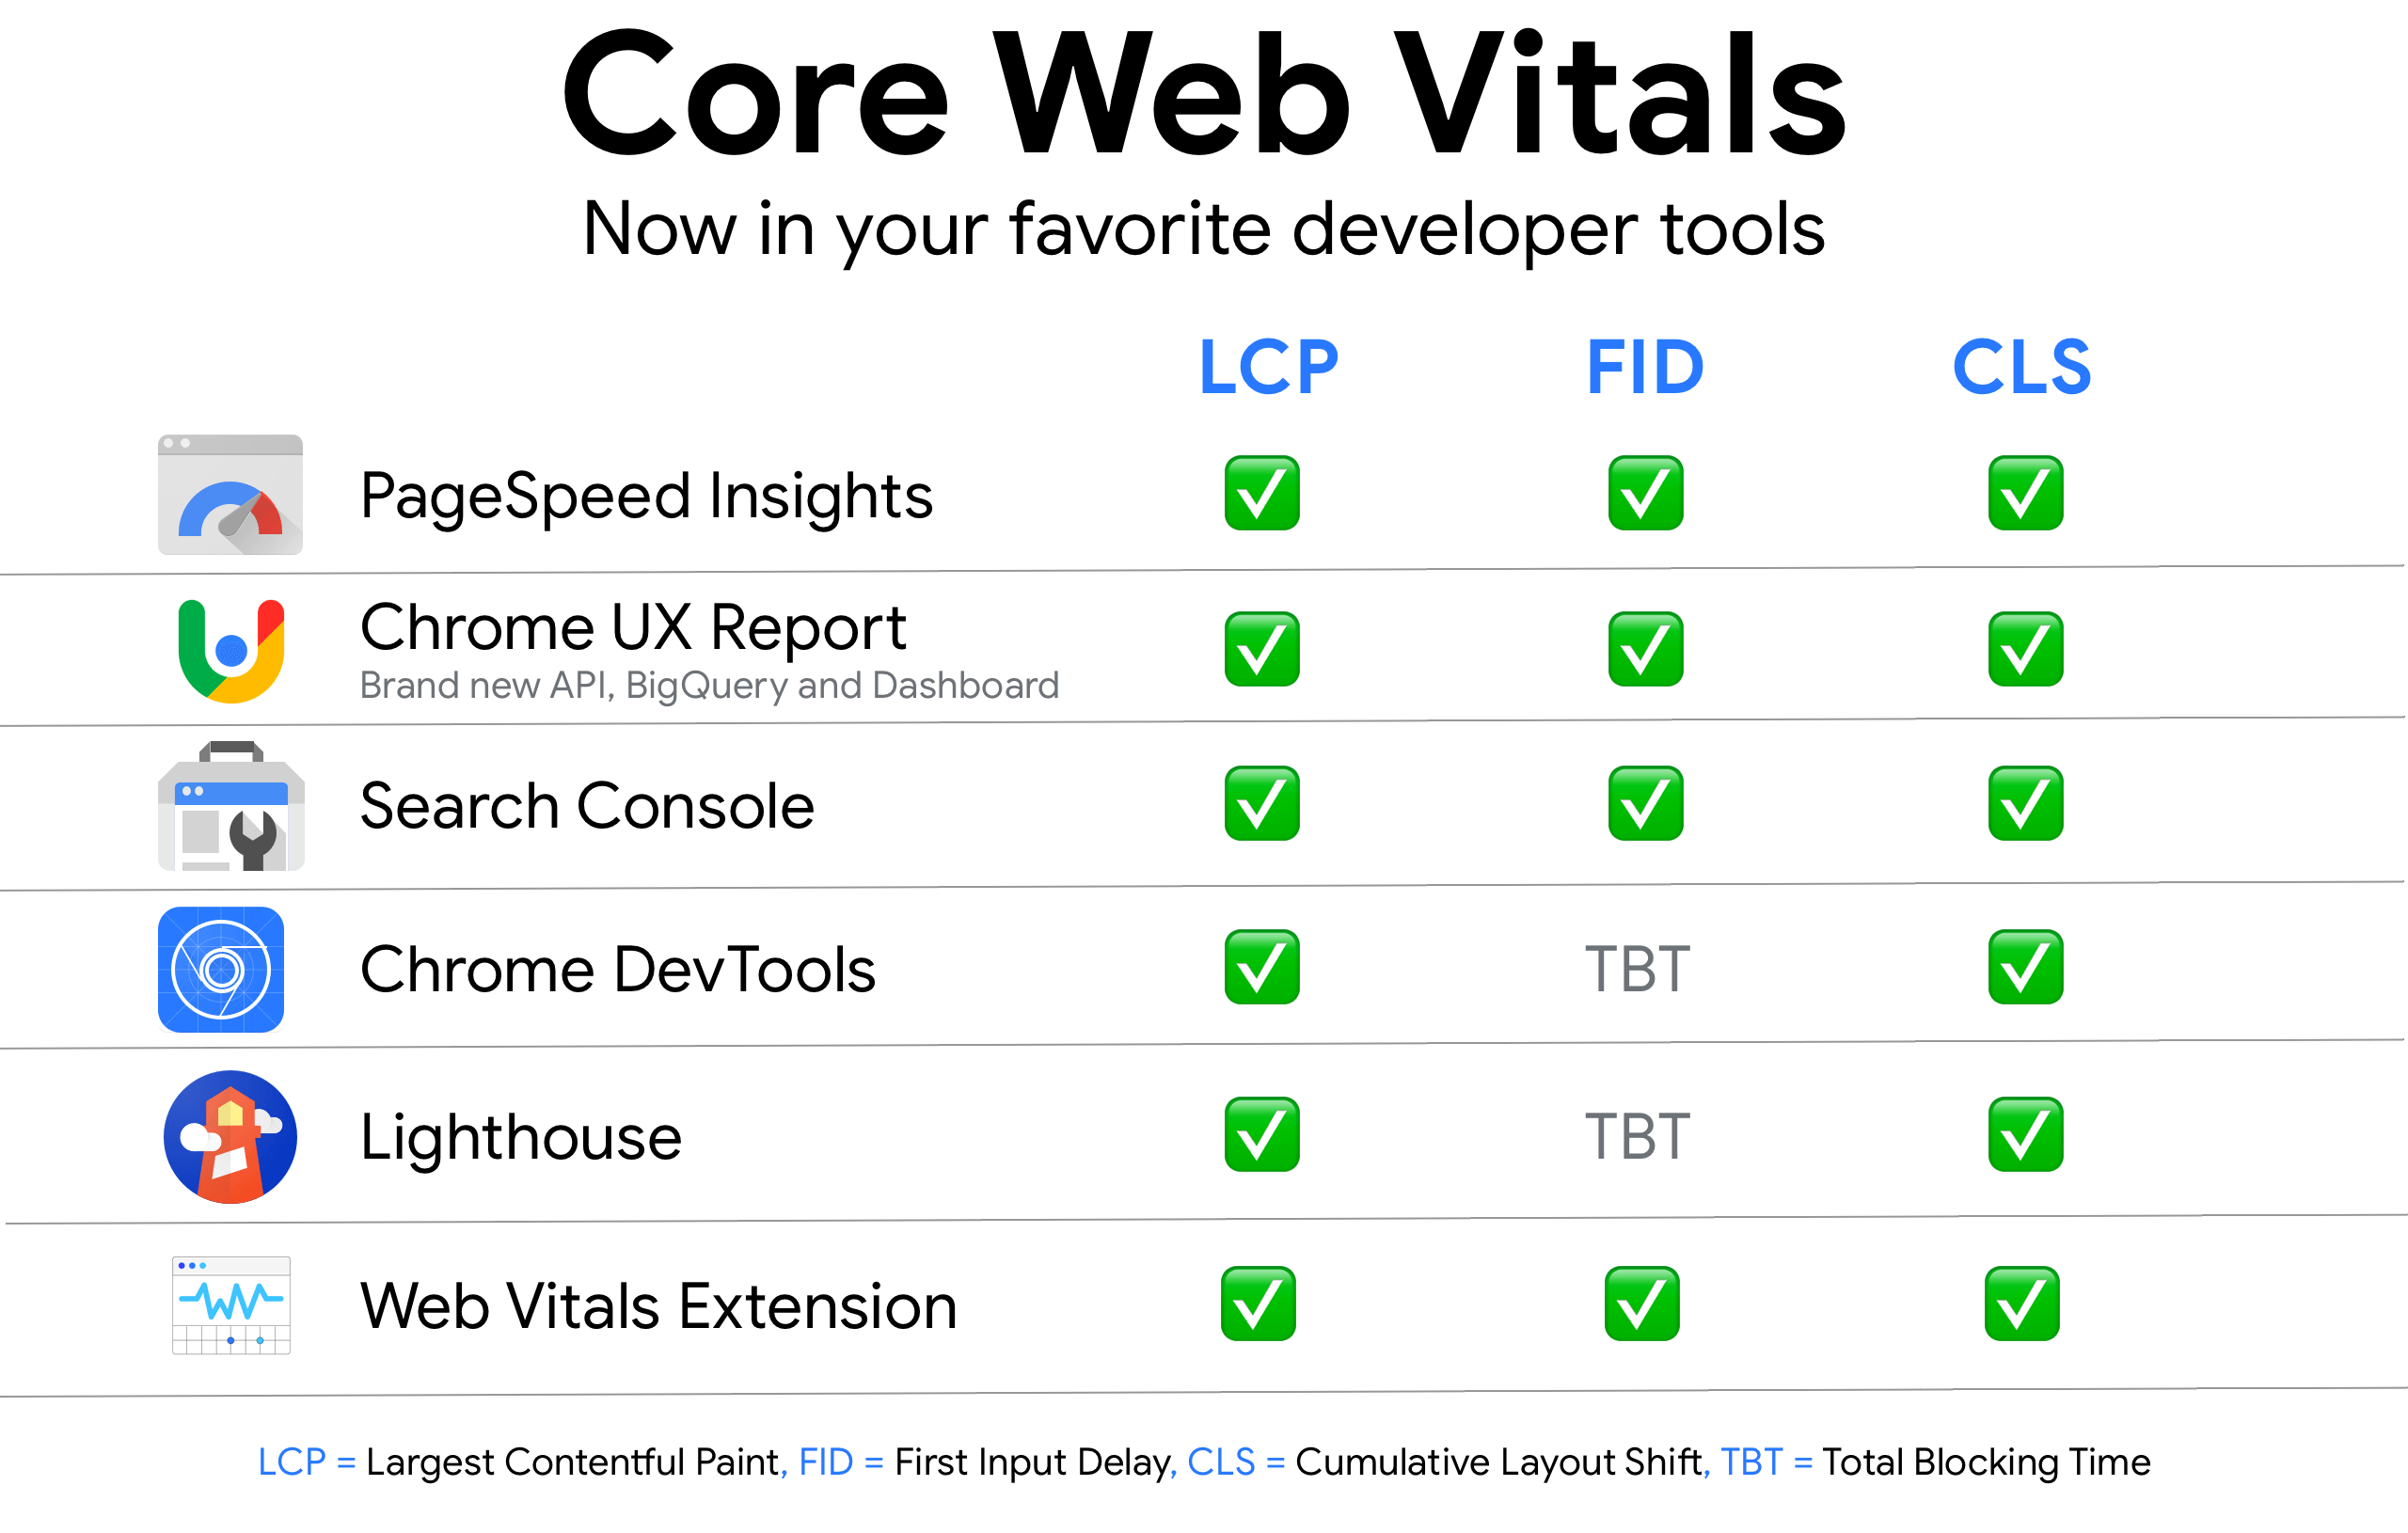 Summary of Chrome and Search Tools that support the Core Web Vitals metrics